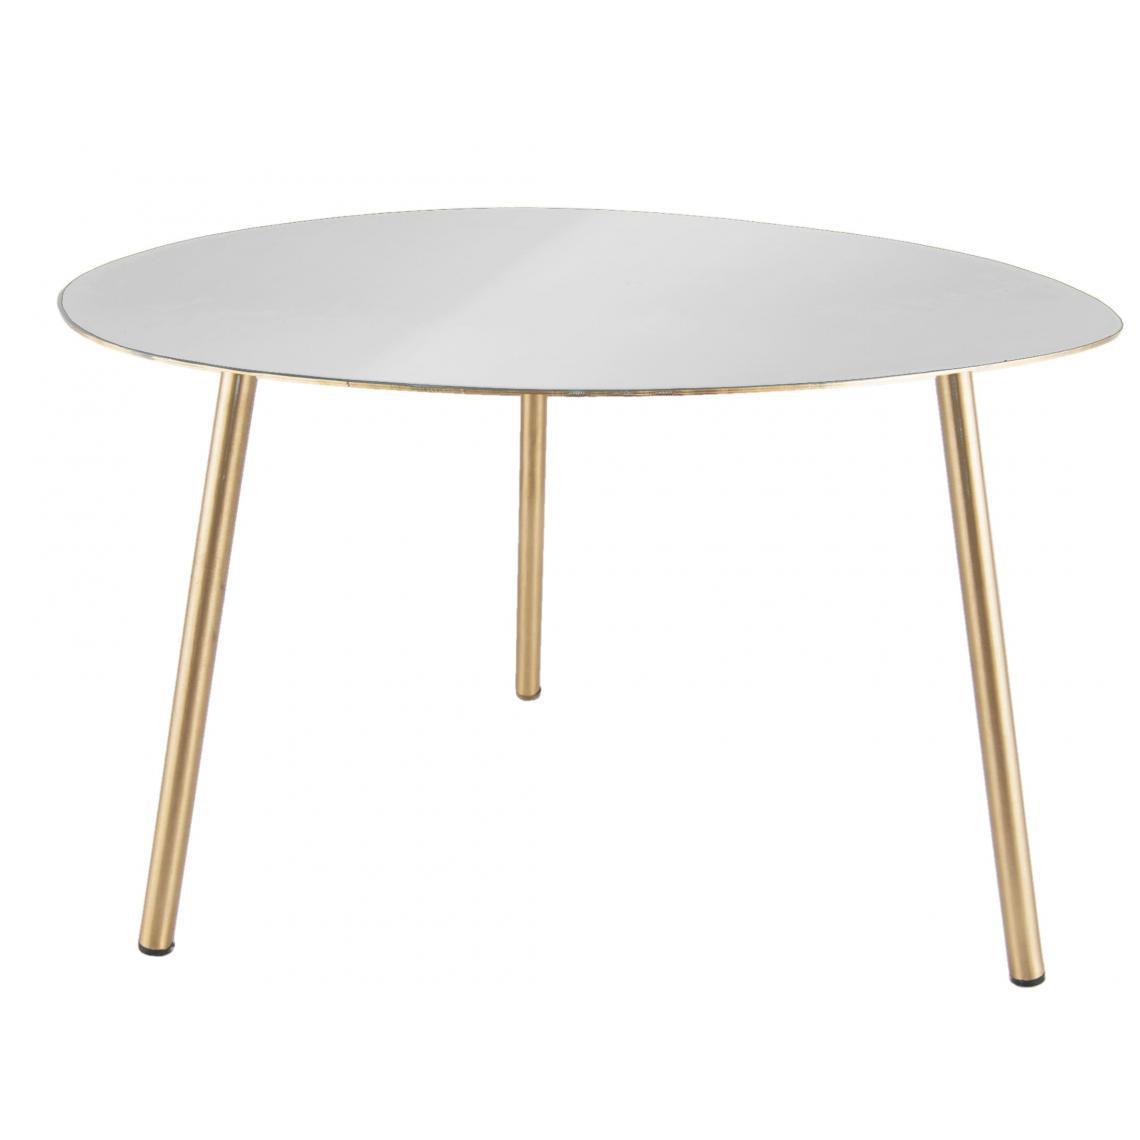 3S. x Home - Table Basse OVOID Large Blanc - Tables basses